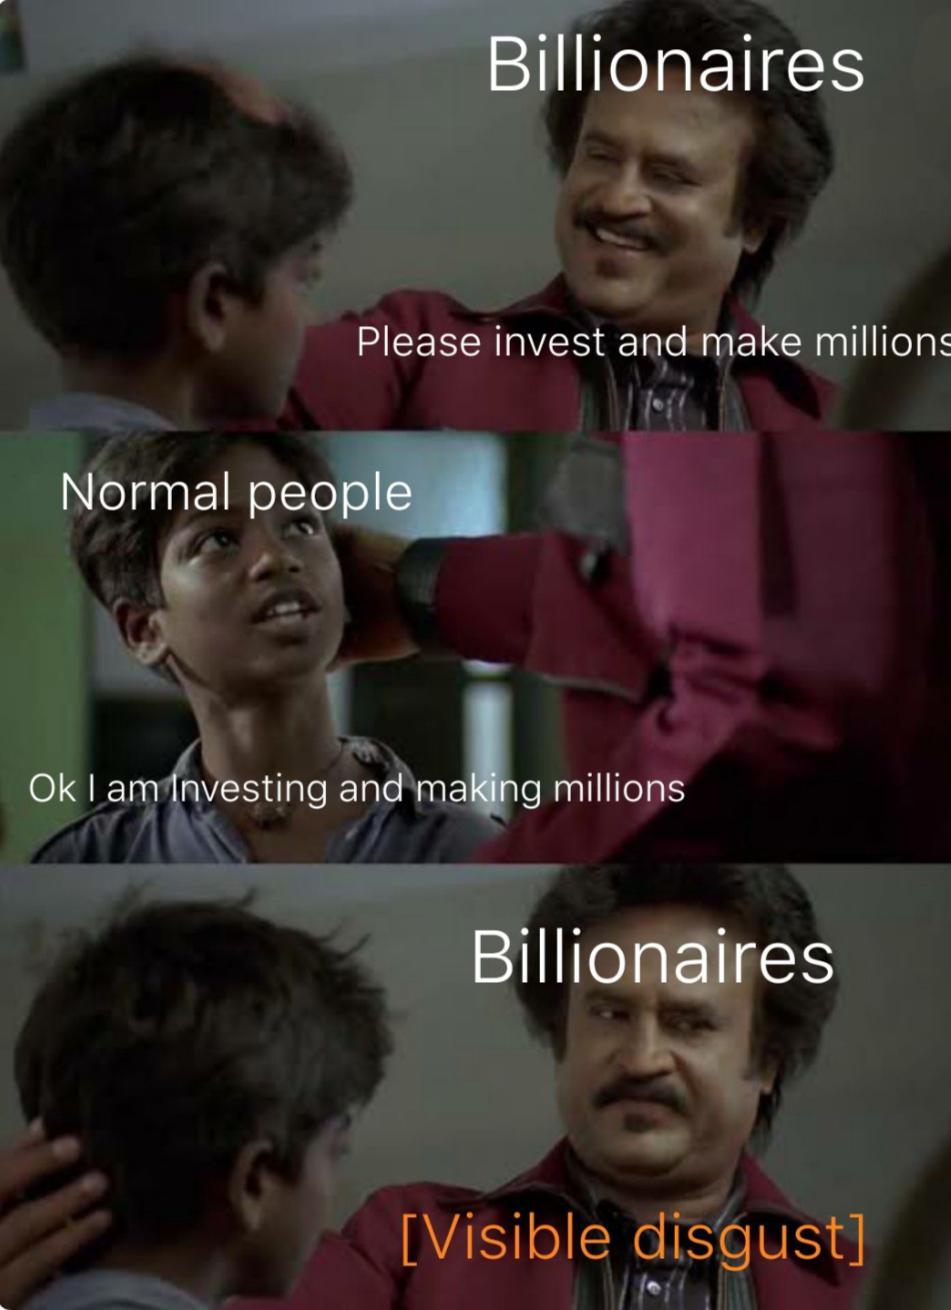 head - Billionaires Please invest and make millions Normal people Ok I am Investing and making millions Billionaires Visible disgust